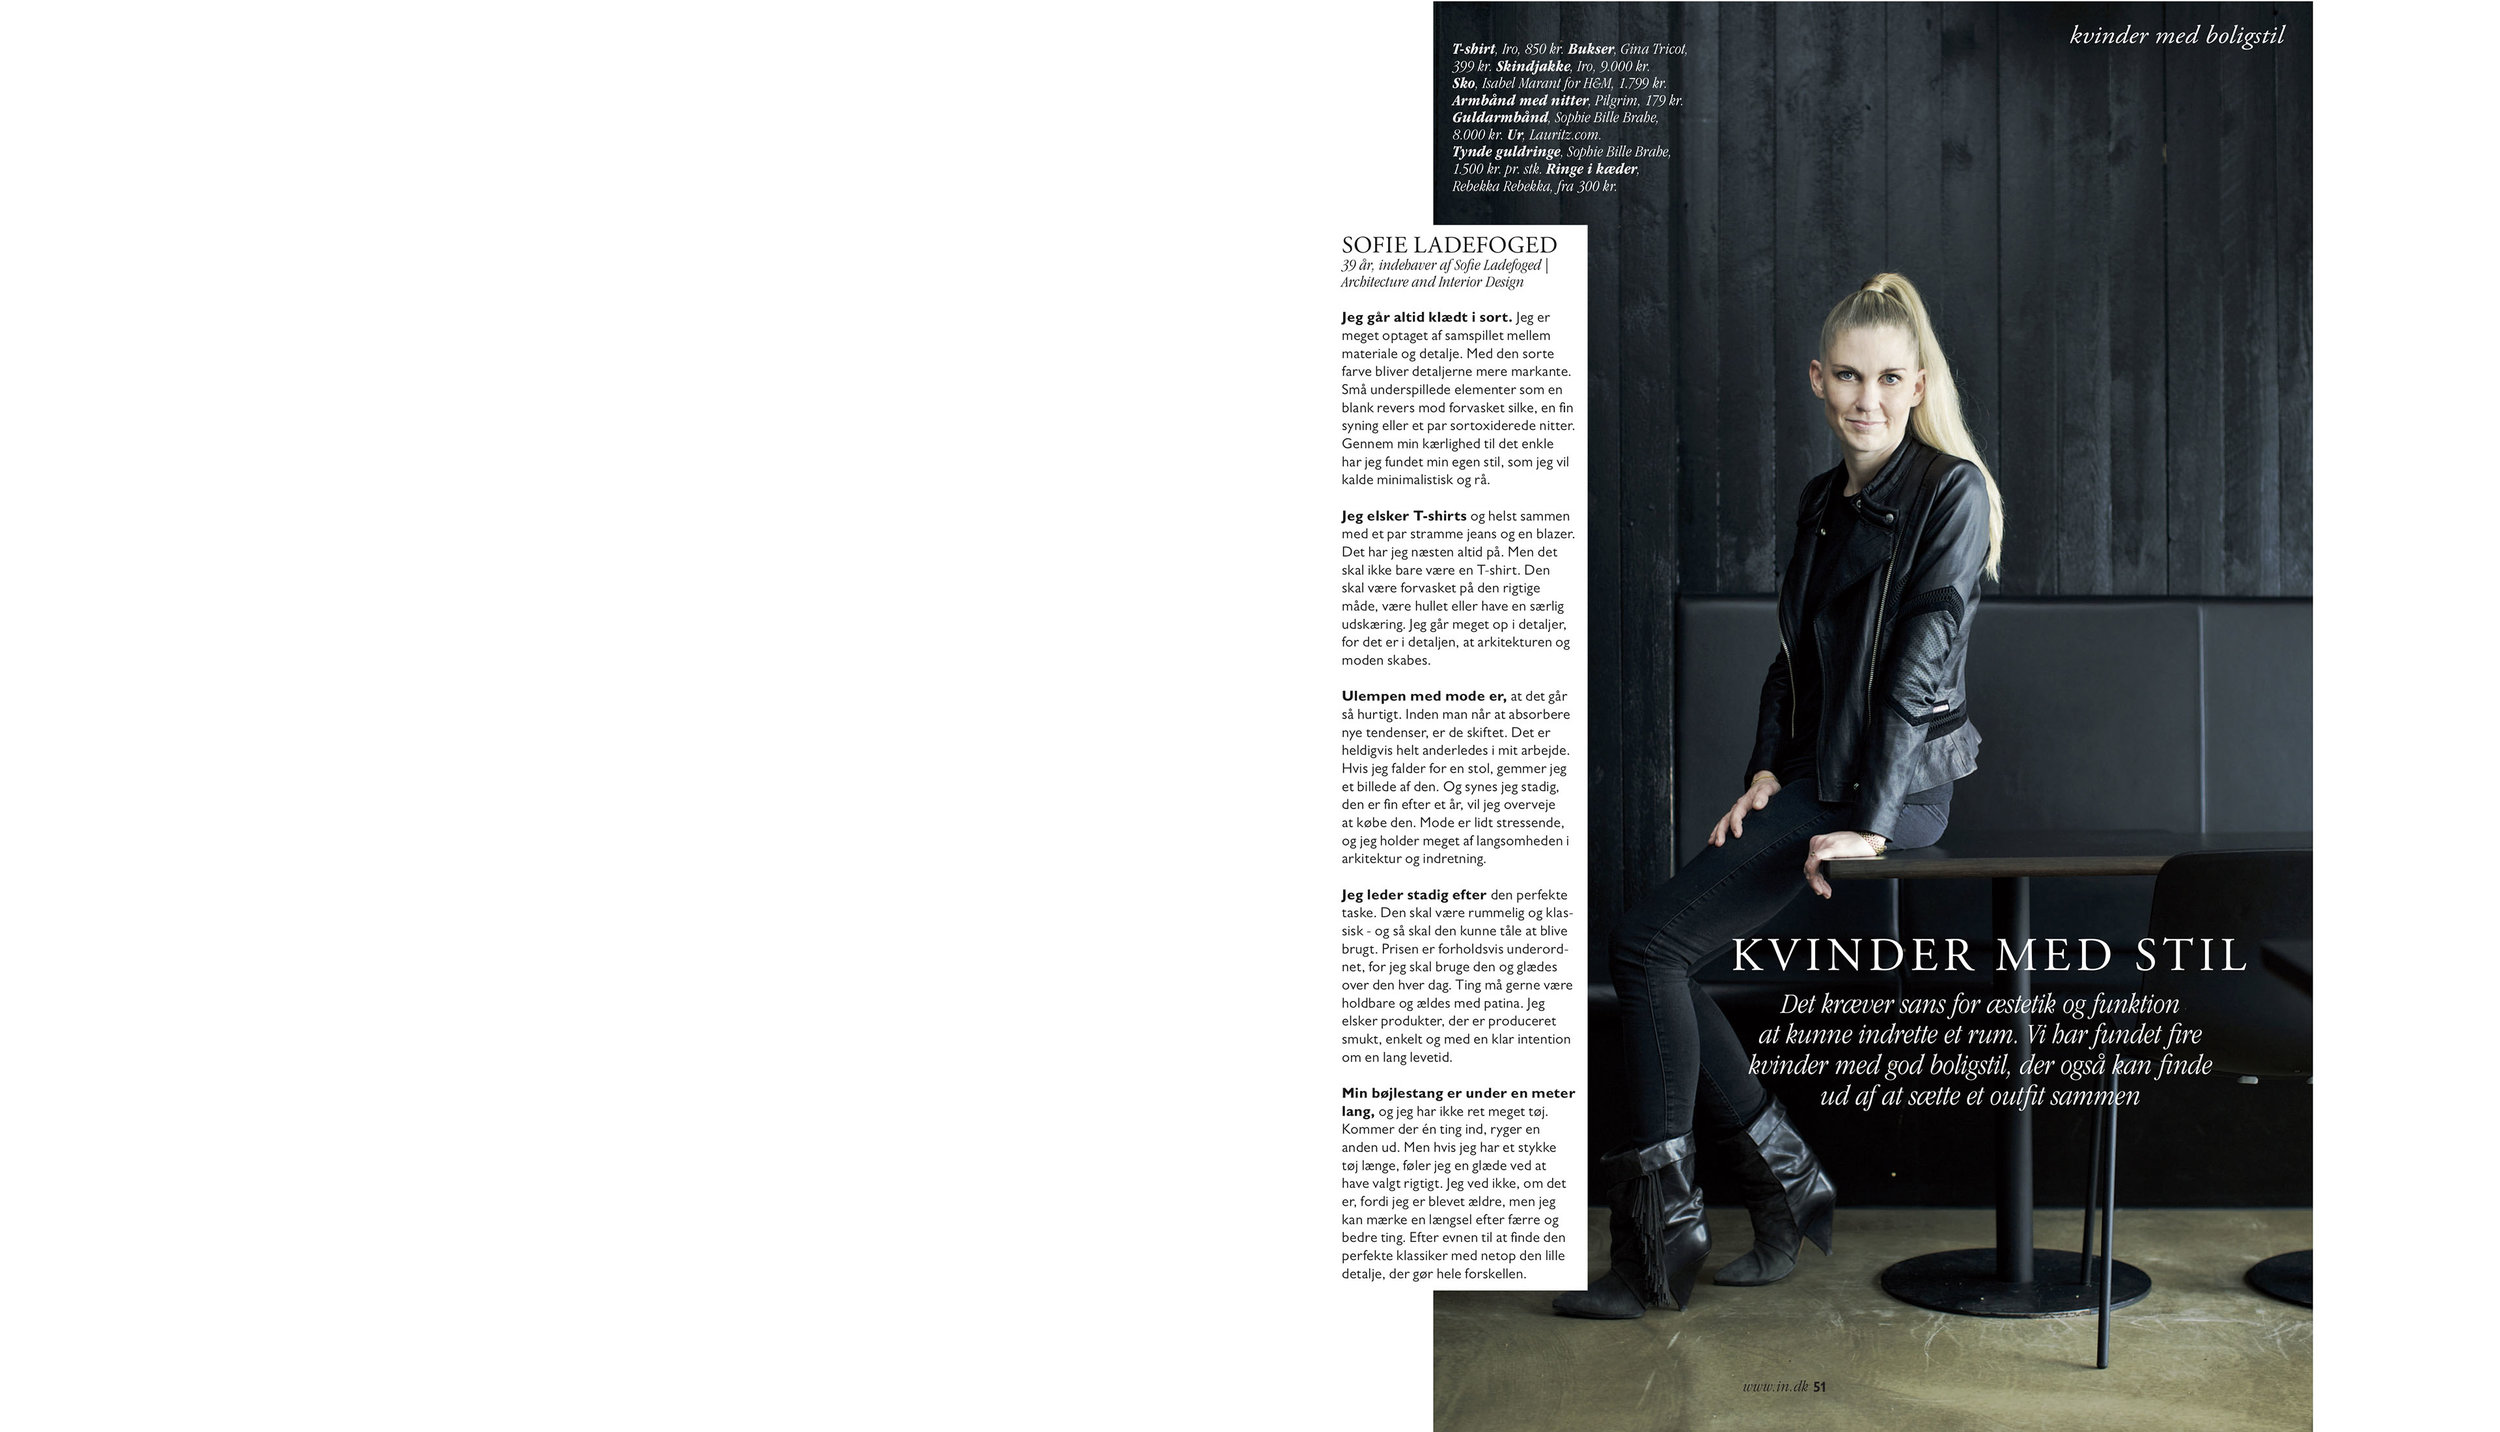 sofie-ladefoged-press-modemagasinet-in-2014-page-02.jpg